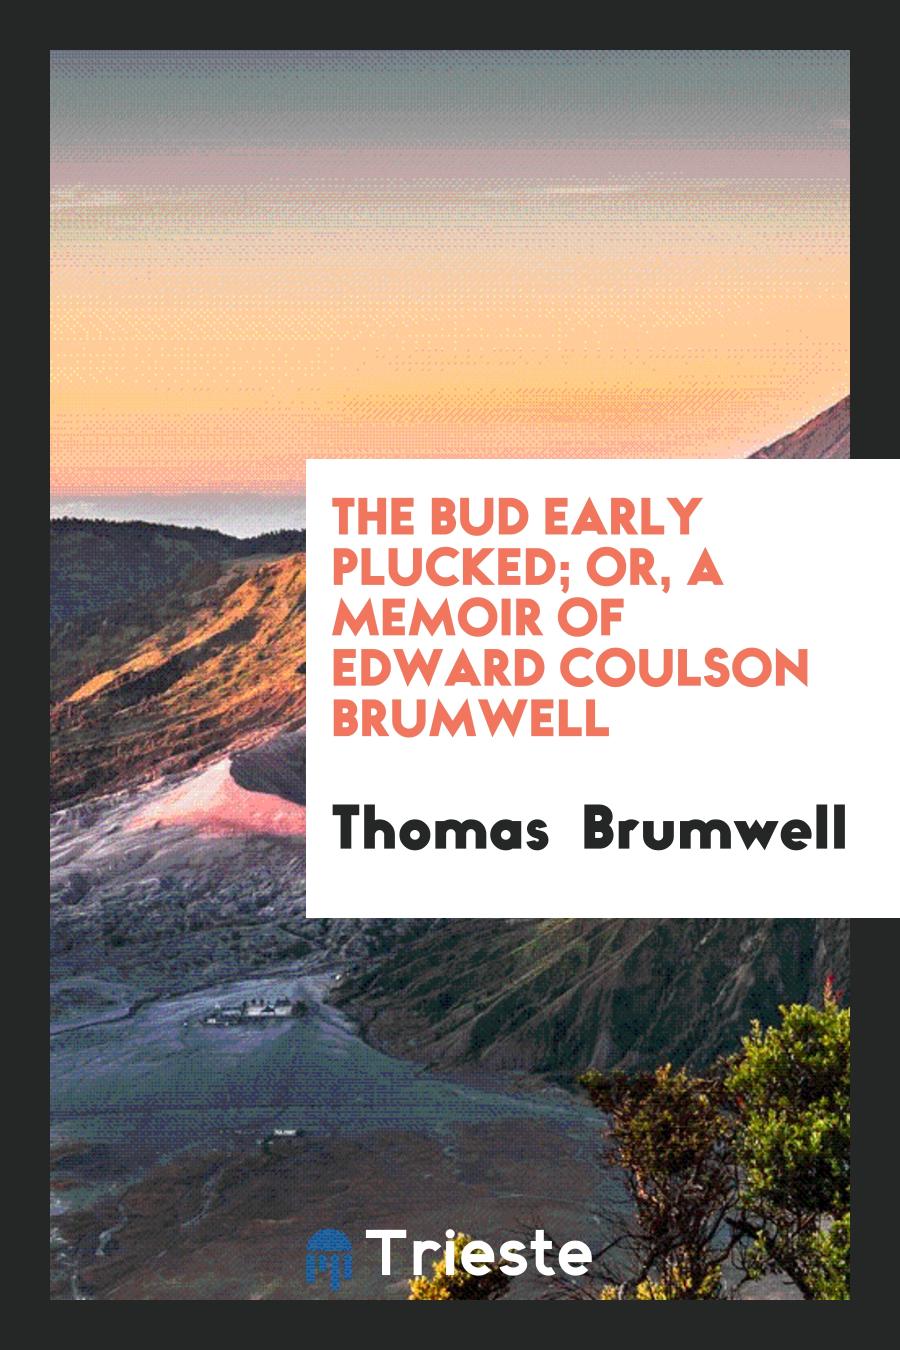 The bud early plucked; or, A memoir of Edward Coulson Brumwell